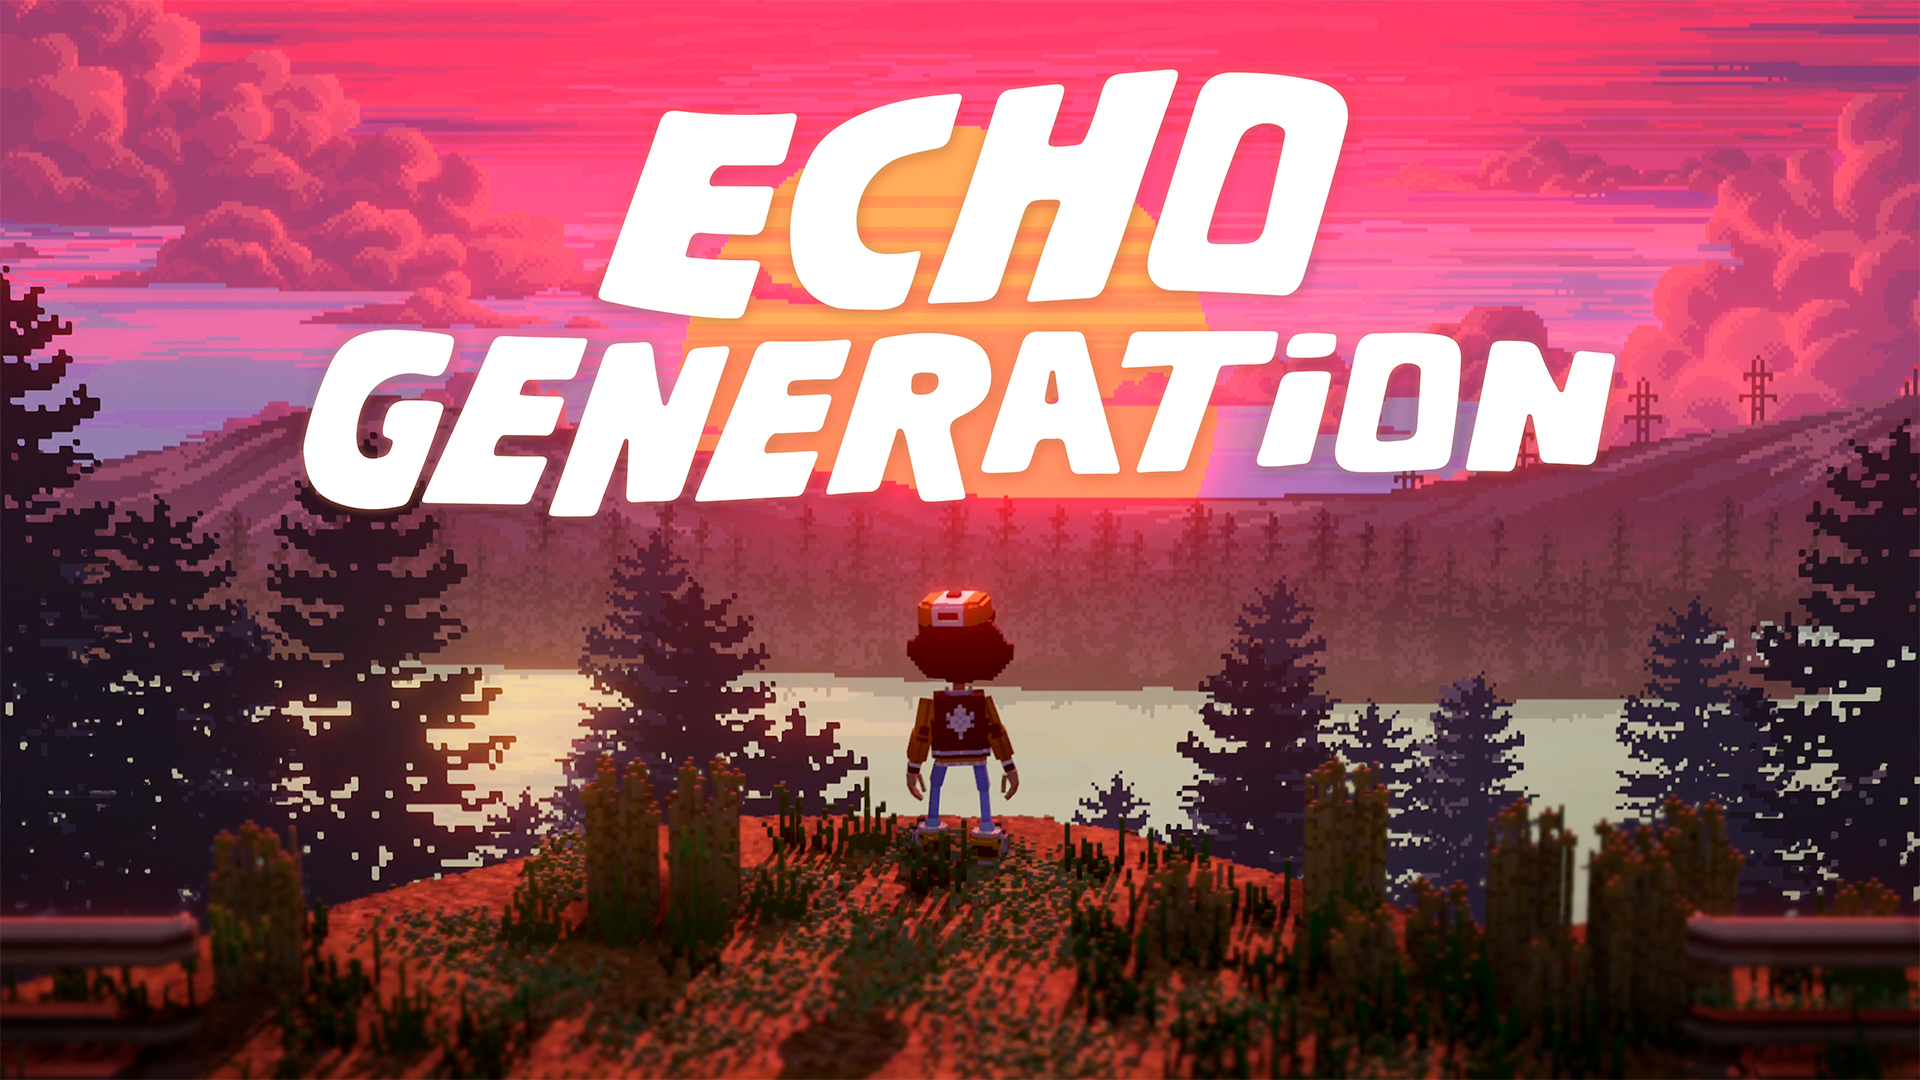 Video For Brave the Supernatural in Echo Generation